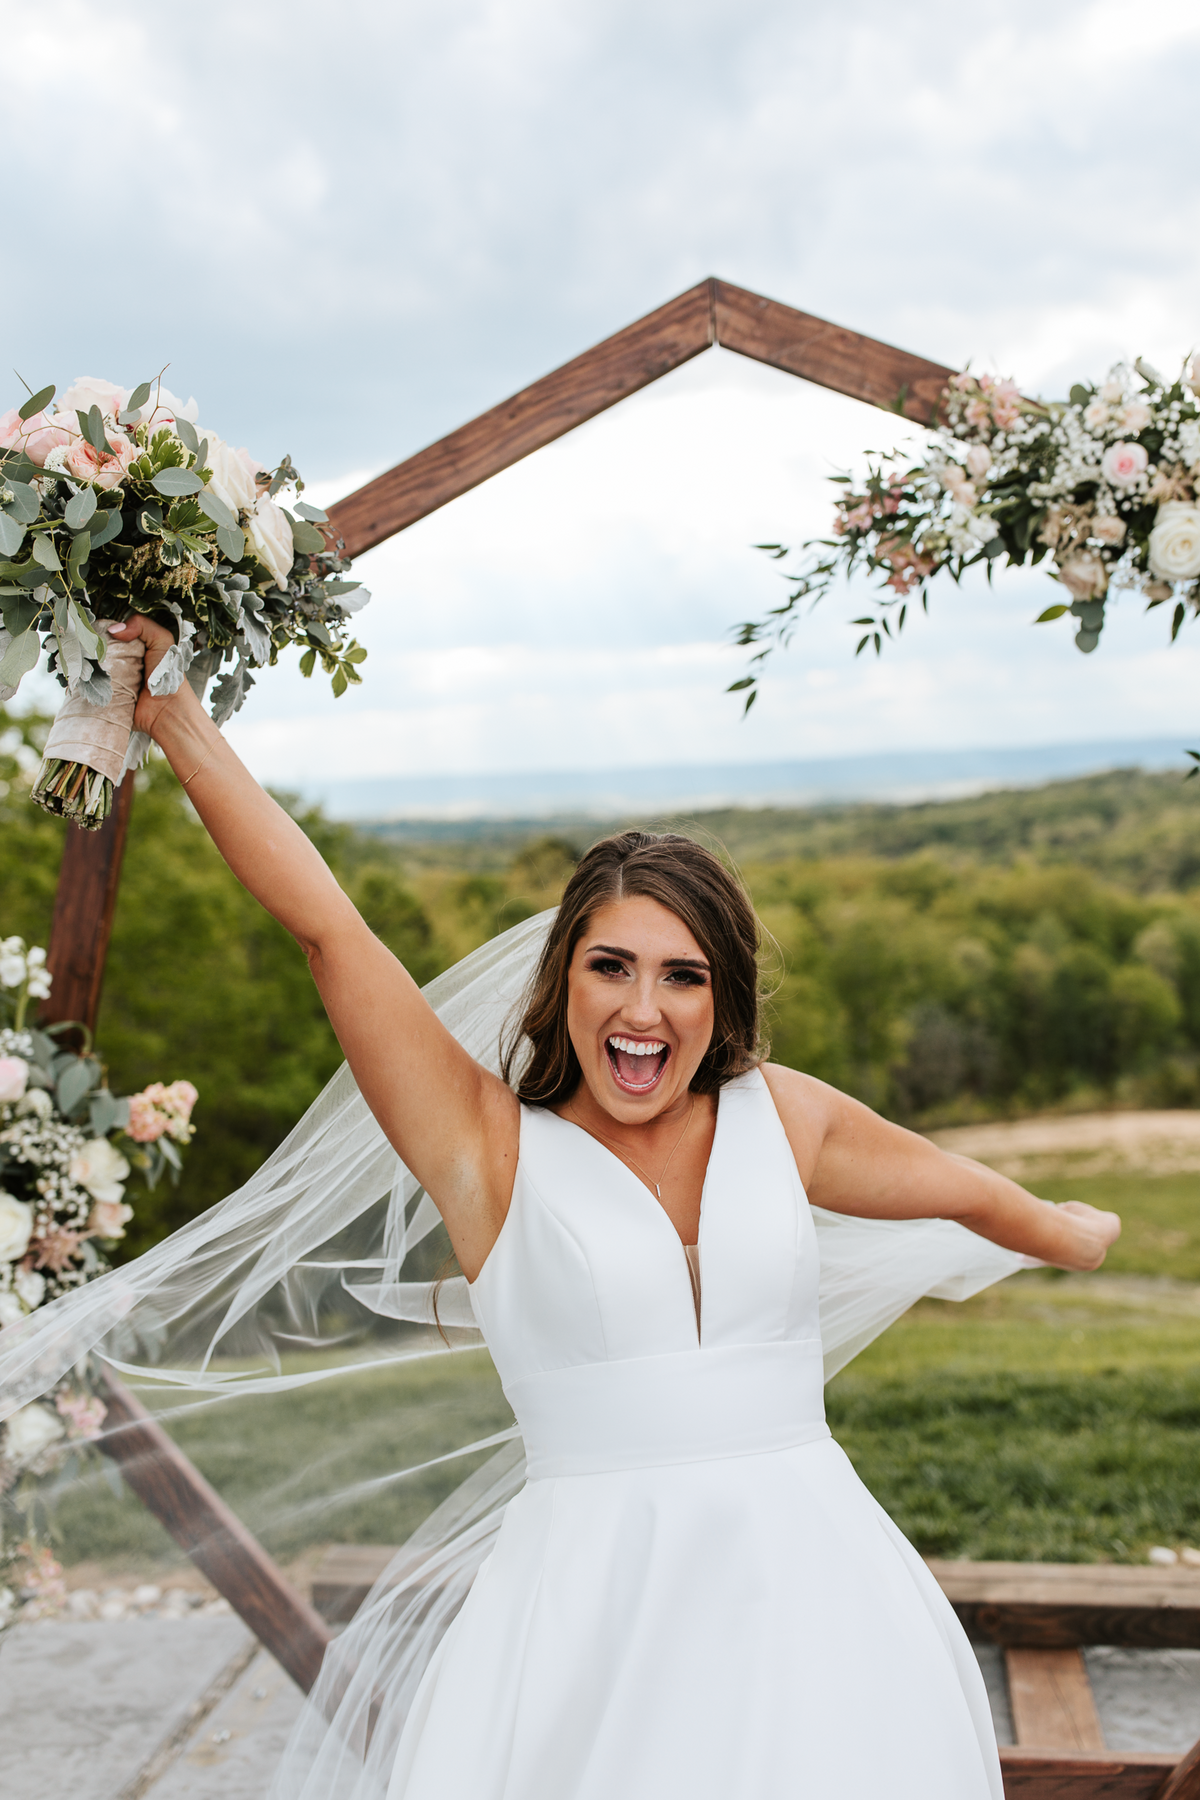 Howe Farms Wedding | Carly Crawford Photography | Knoxville and East Tennessee Wedding, Couples, and Portrait Photographer-241889